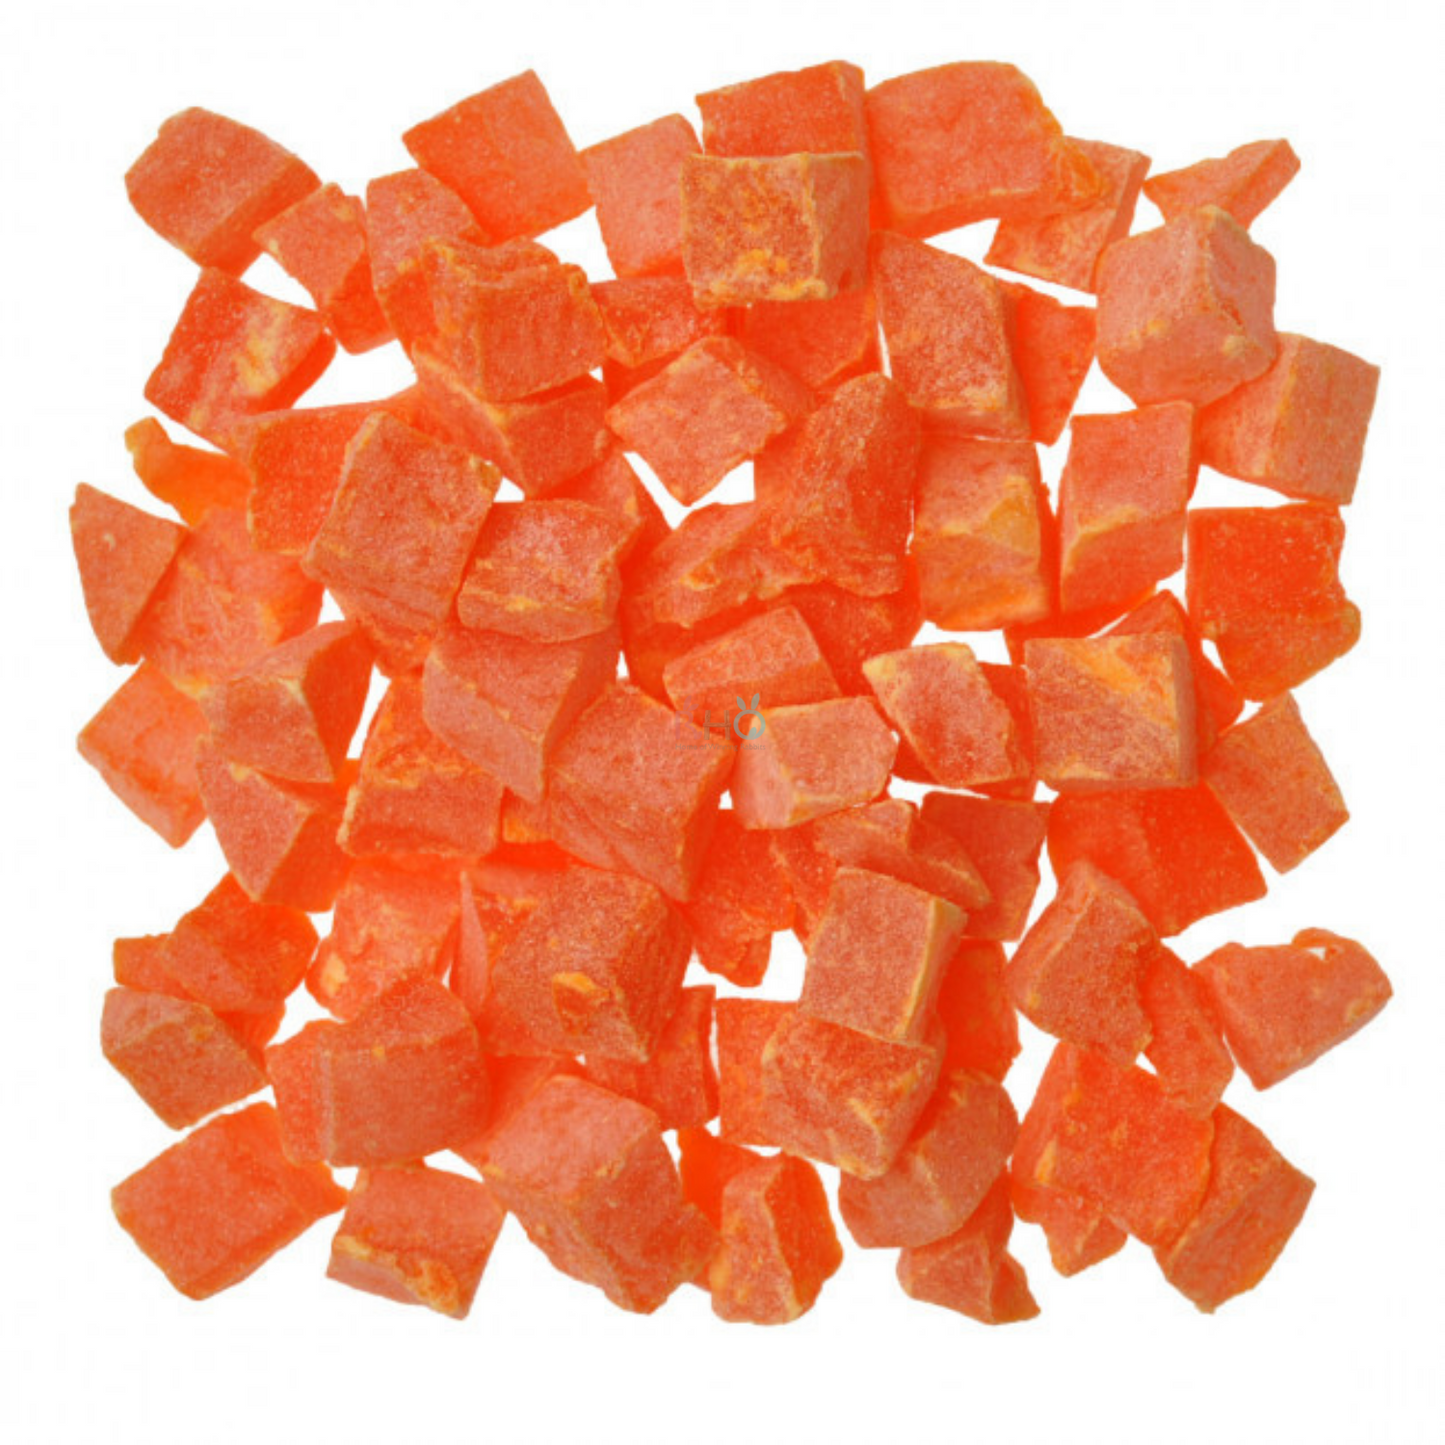 KW Cages Bunny Cubes Dried Papaya Cubes 6oz